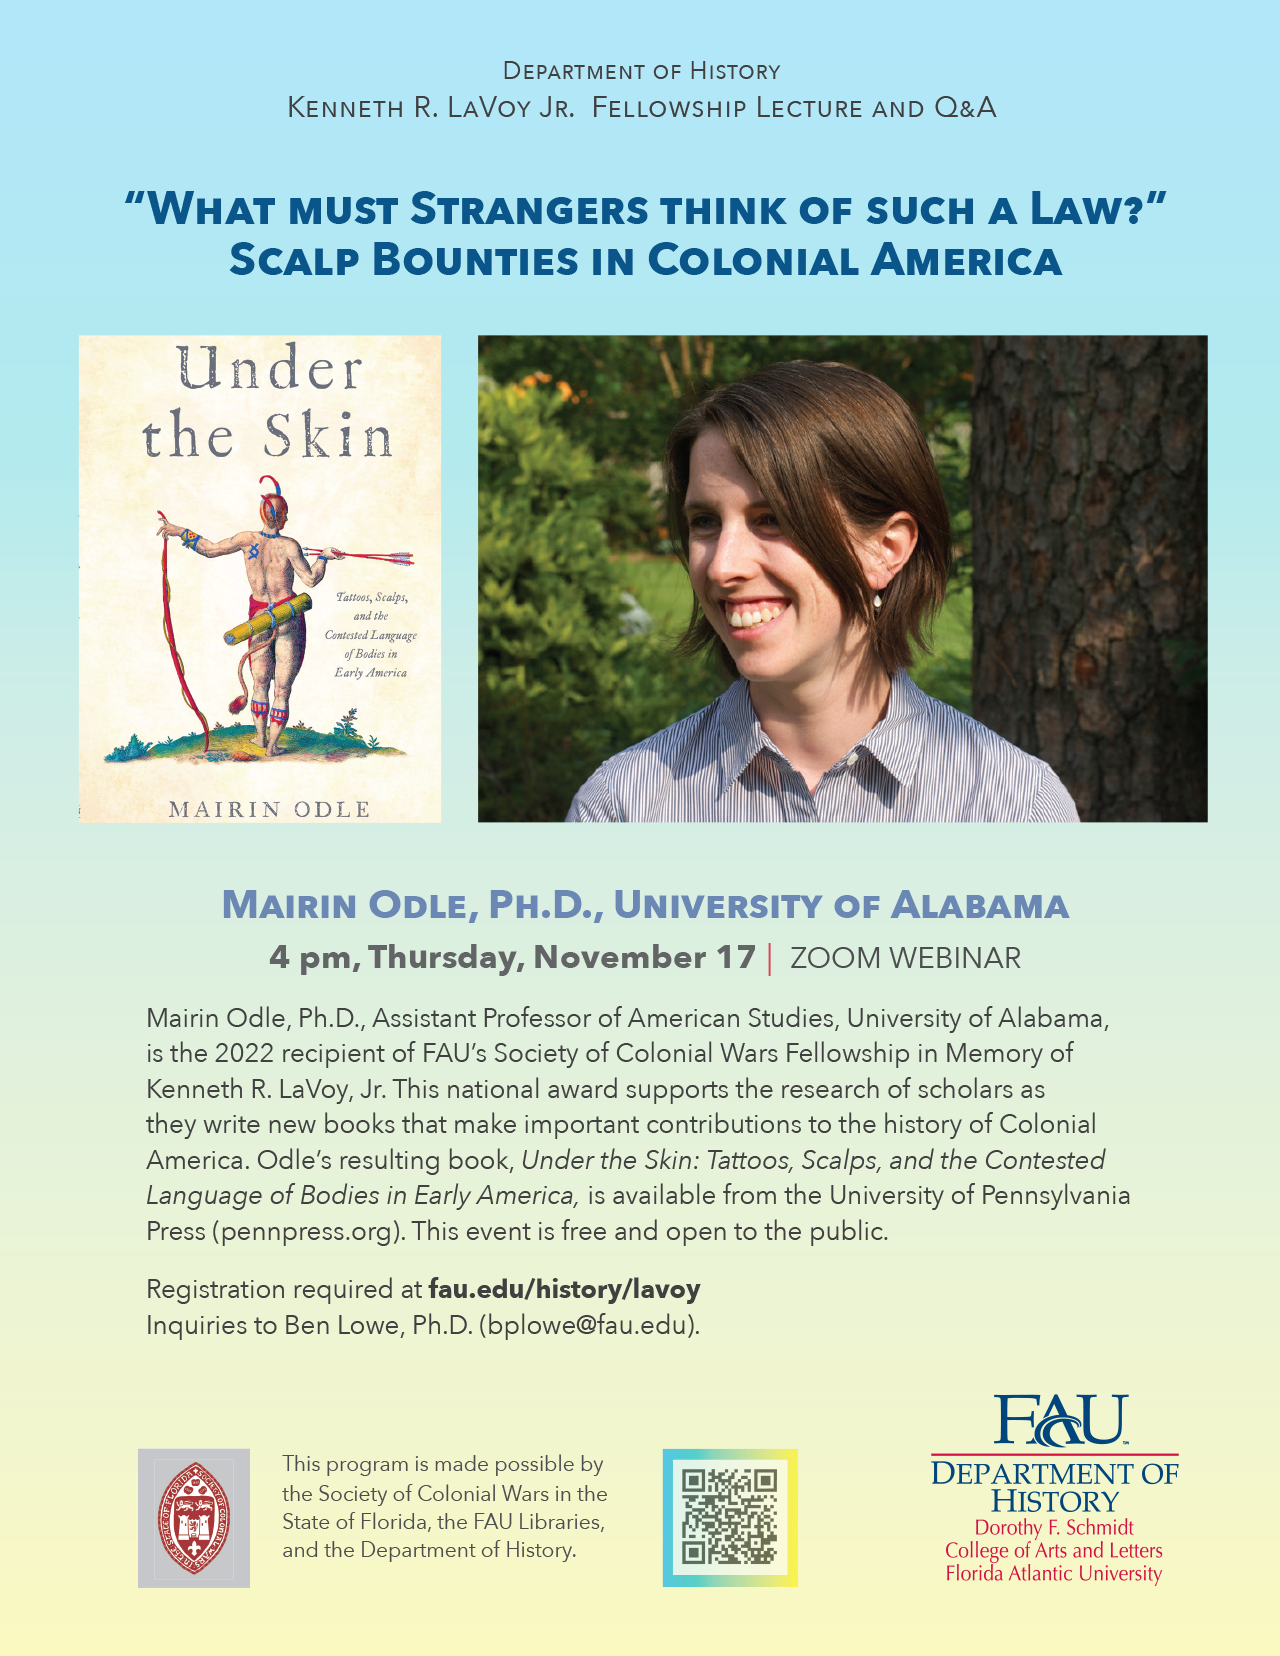 Event Flyer: "What Must Strangers Think of Such a Law?" Scalp Bounties in Colonial America. Mairin Odle, Ph.D., University of Alabama. 4pm Thursday, November 17 (Zoom Webinar). Registration required at fau.edu/history/lavoy